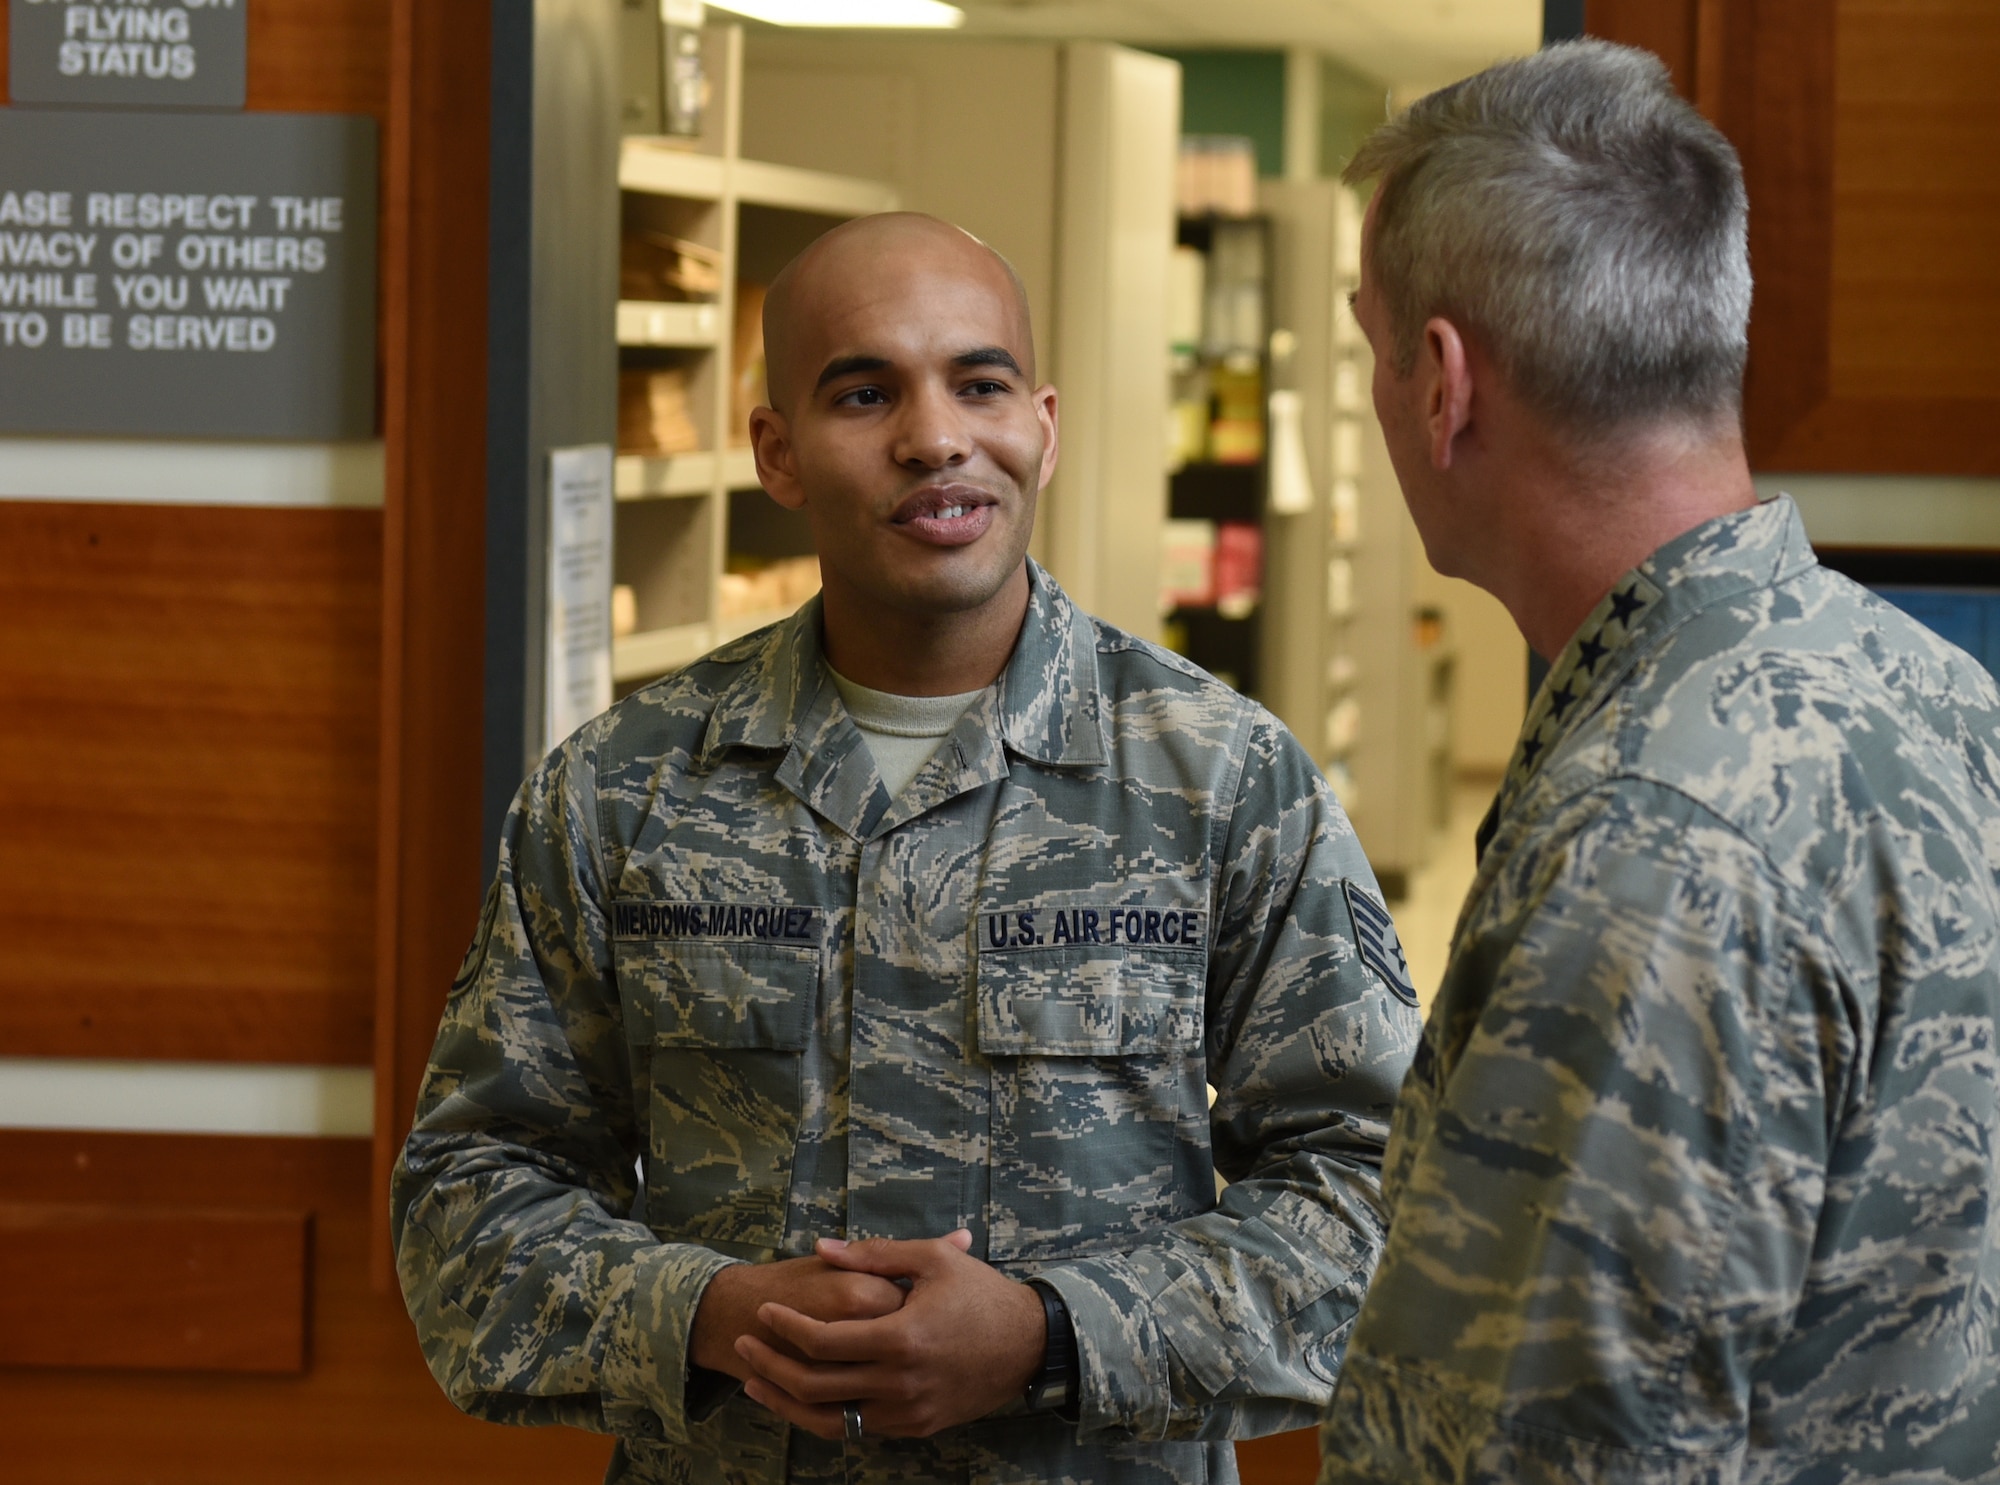 U.S. Air Force Staff Sgt. William Meadows-Marquez, left, pharmacy technician with the 36th Medical Group, briefs Gen. Terrence J. O'Shaughnessy, Pacific Air Forces commander, on the pharmacy’s support to the wing Feb. 1, 2017, at Andersen Air Force Base, Guam. During his visit, O'Shaughnessy visited with Airmen and Soldiers from across the base to gain a firsthand understanding of their mission, capabilities and the base resources available to them. He also discussed the strategic importance of Guam in the Indo-Asia-Pacific region and thanked Airmen for their continued dedication and support. (U.S. Air Force photo by Airman 1st Class Jacob Skovo)
